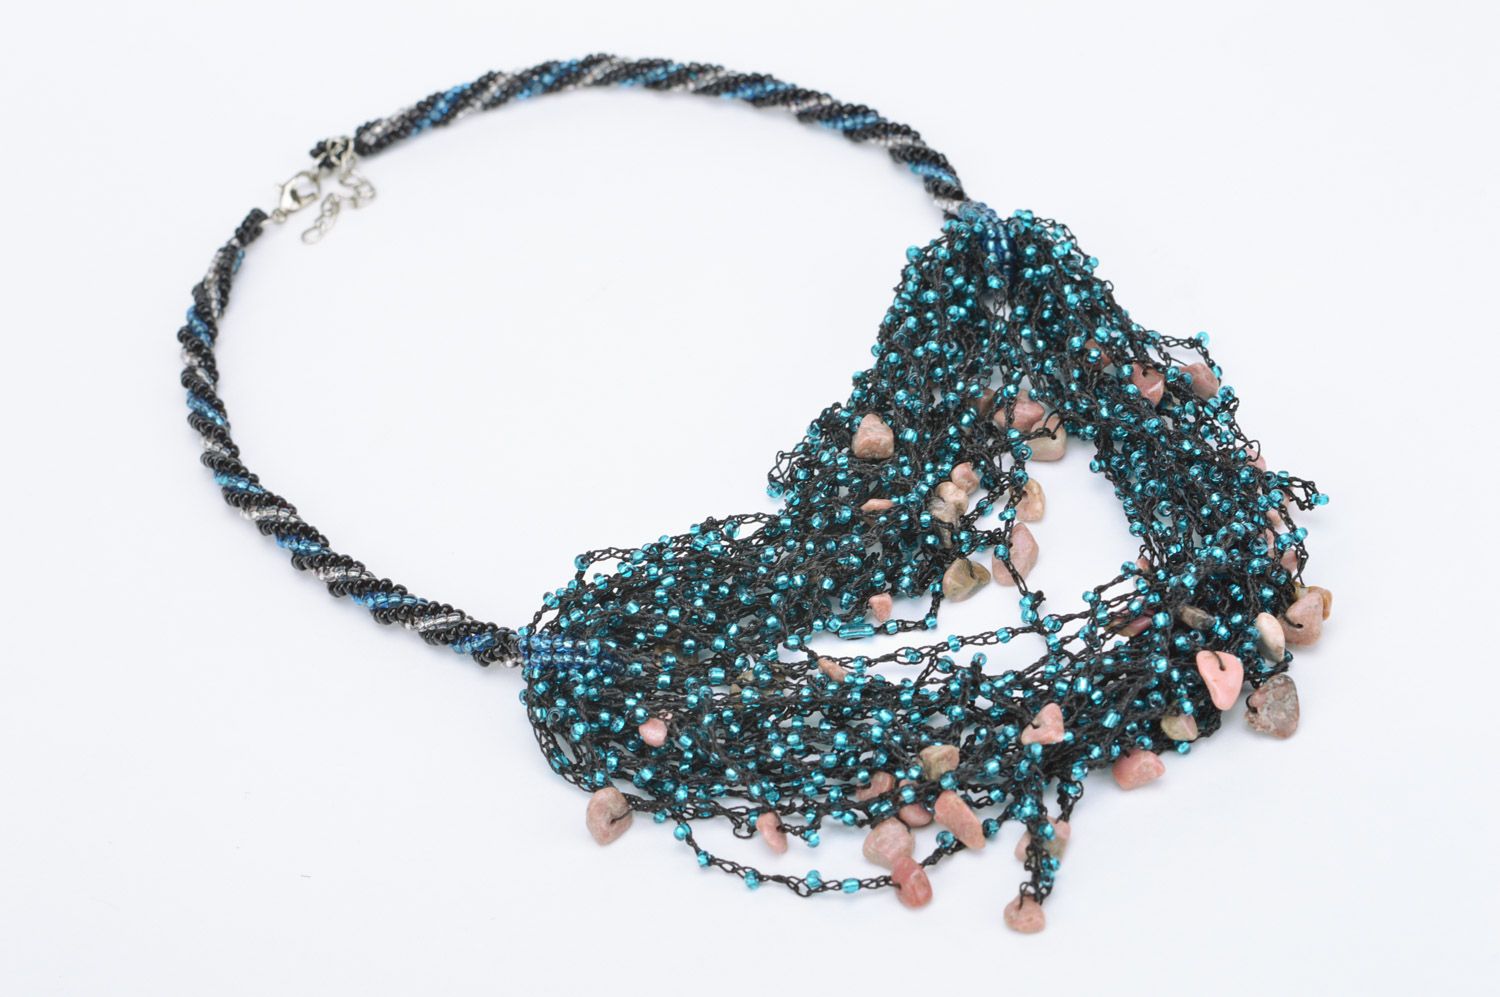 Handmade airy volume necklace woven of Czech beads and corals in dark colors photo 2